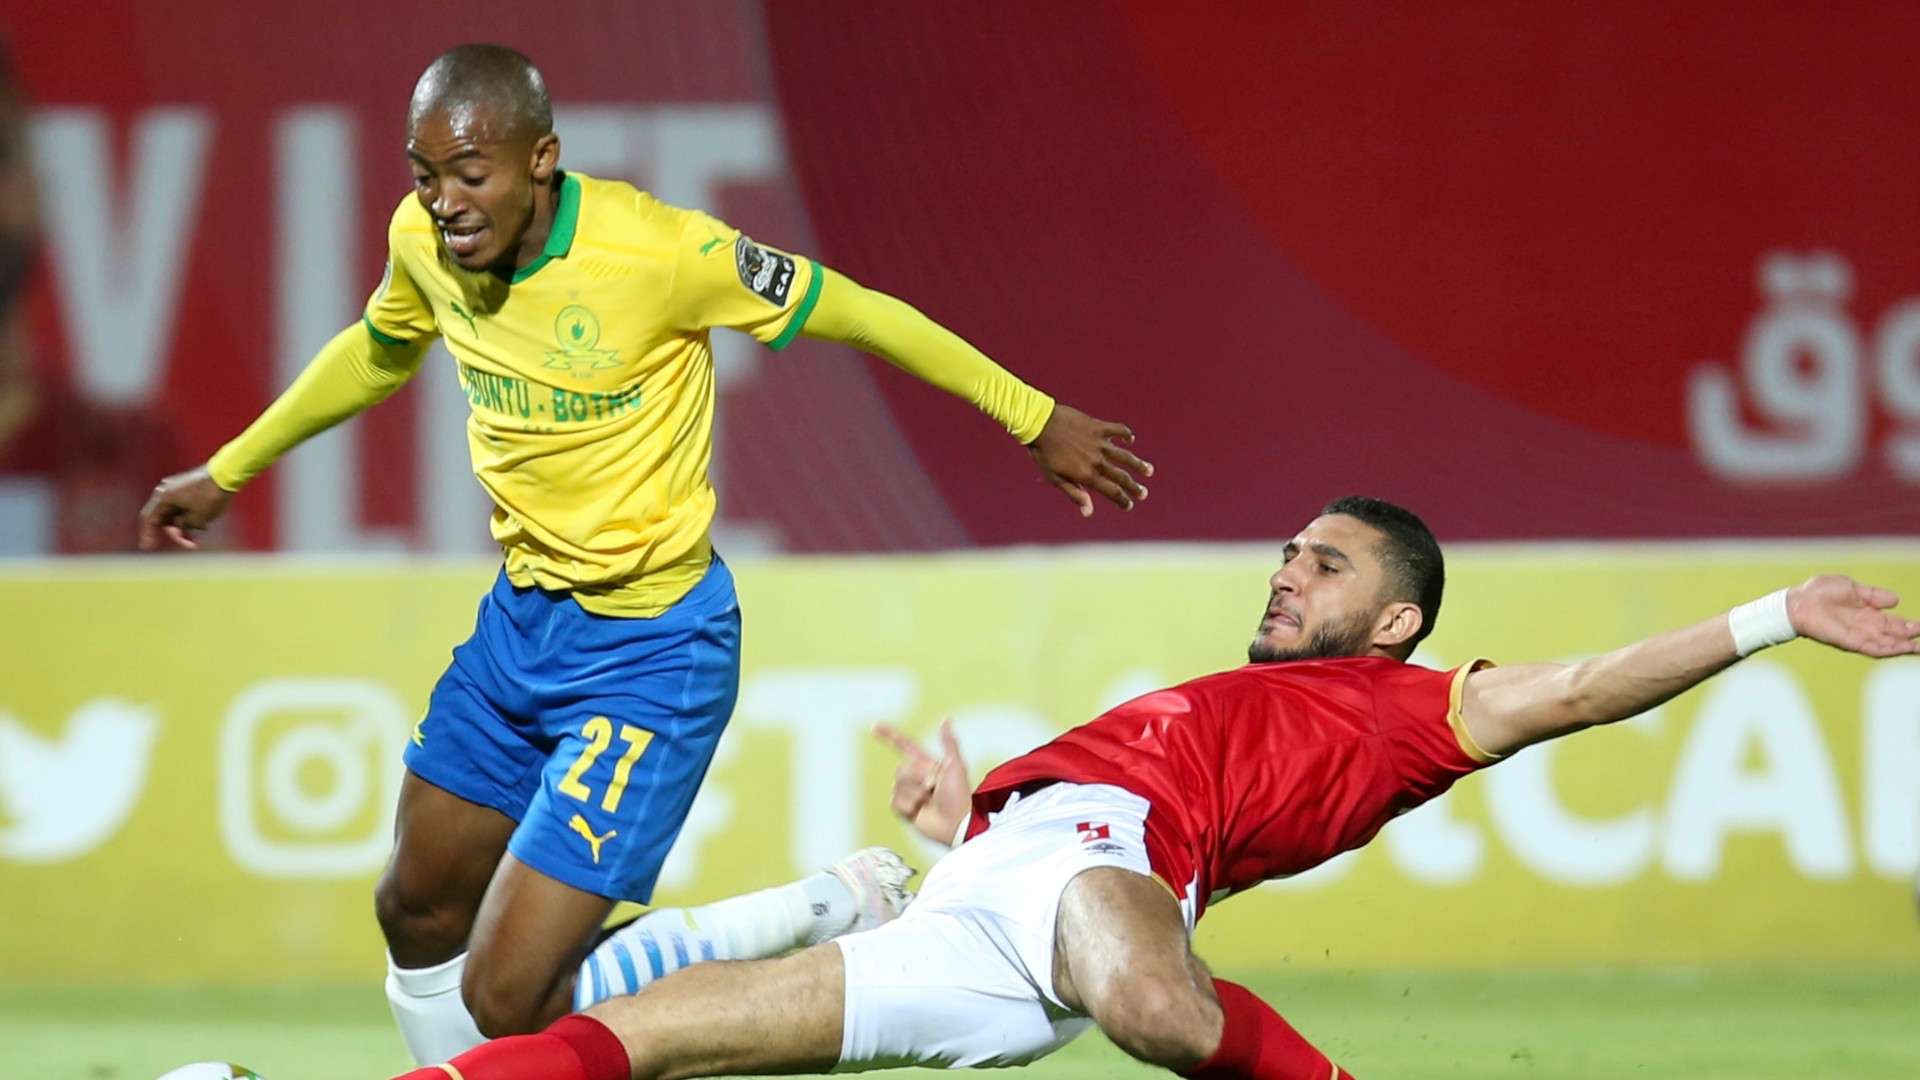 Thapelo Morena of Mamelodi Sundowns challenged by Rami Rabia of Al Ahly